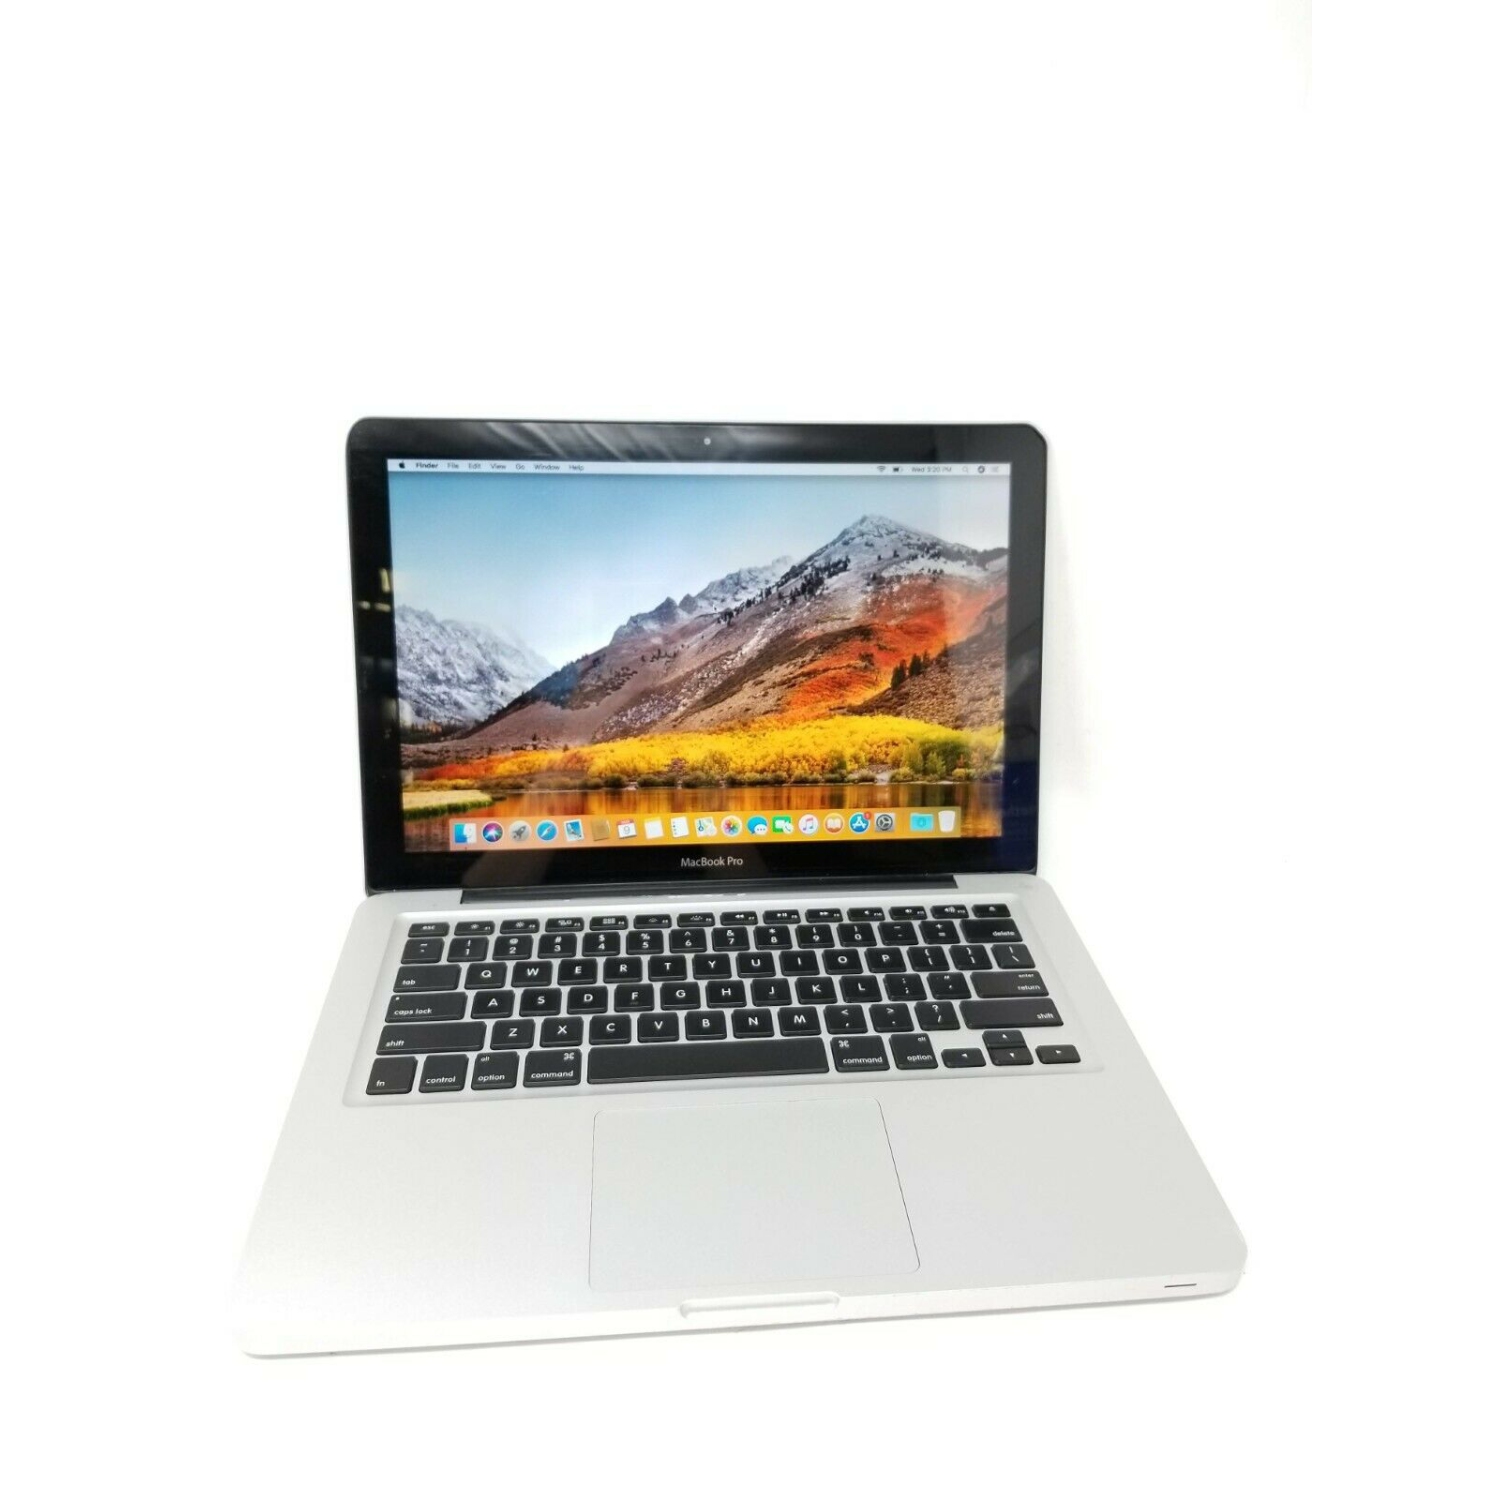 Refurbished (Excellent) - Apple MacBook Pro A1278 (2012) 13.3'' i5 8GB 512G SSD DVD/RW OS High Sierra 10.13 with Free LIXSUNTEKÃ‚Â® ethernet cable